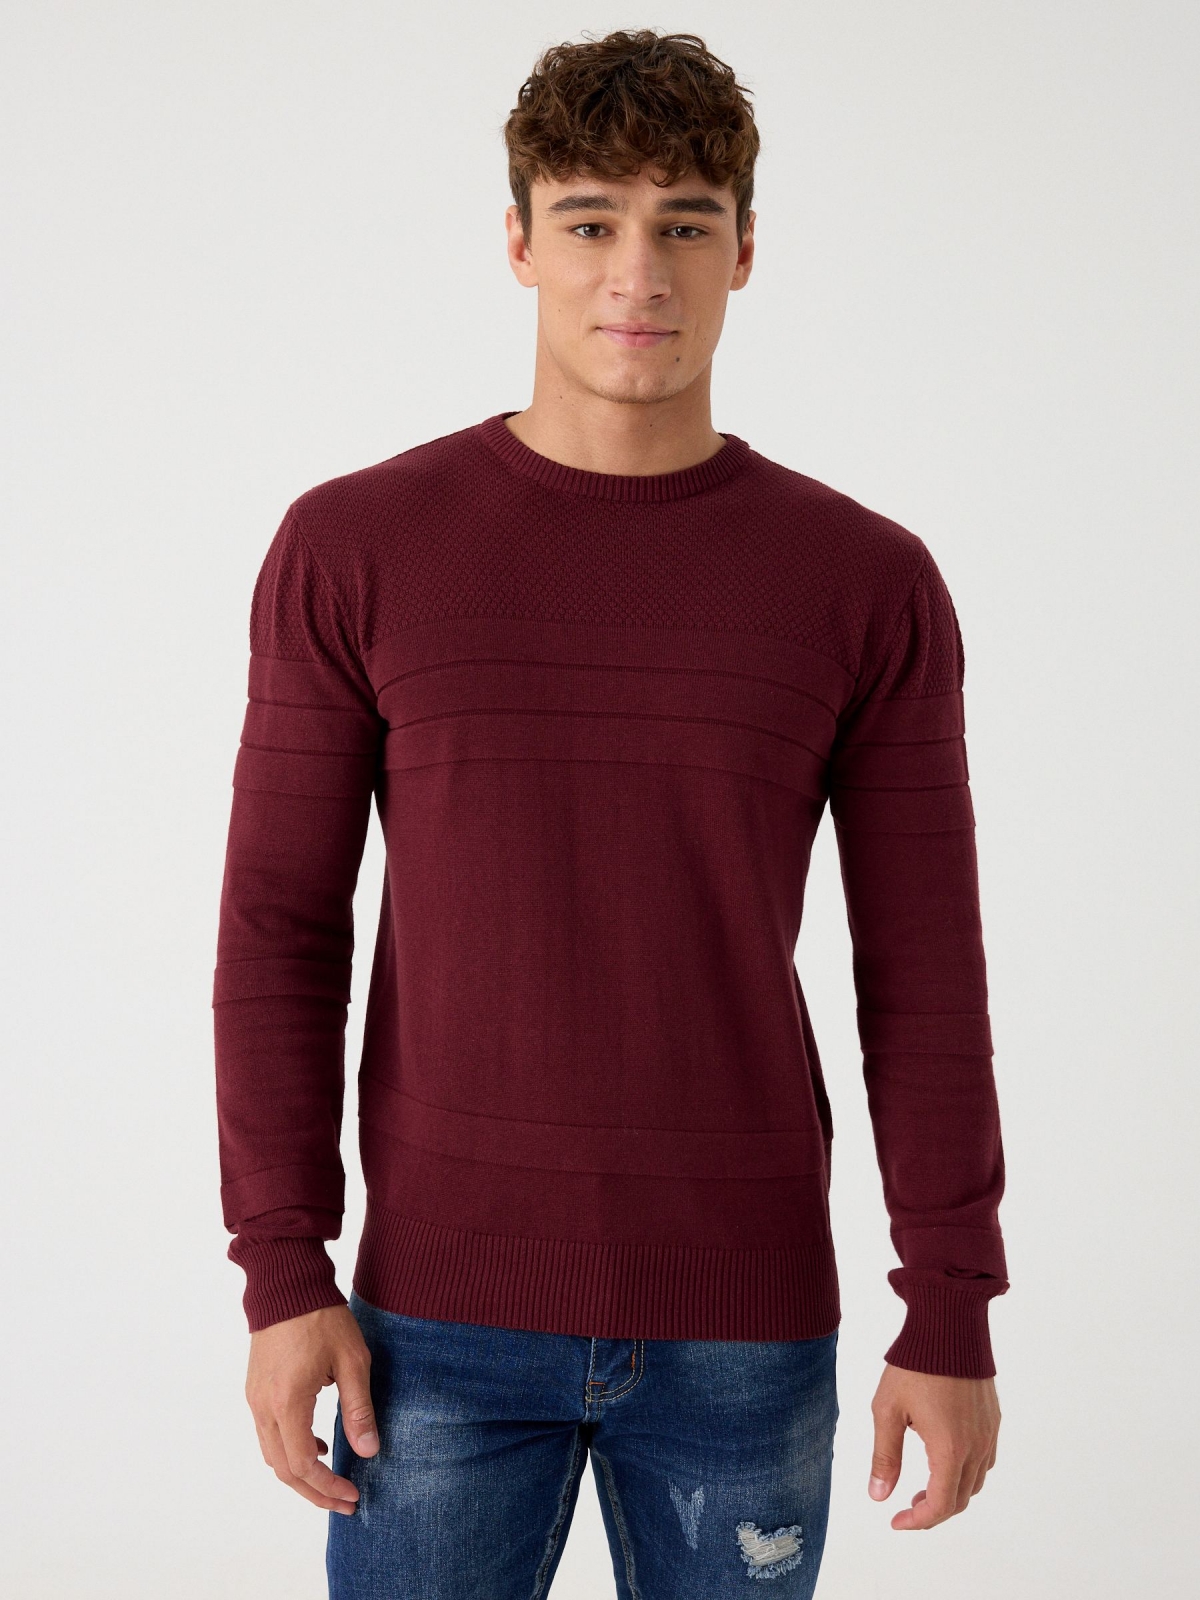 Basic striped texture sweater garnet middle front view